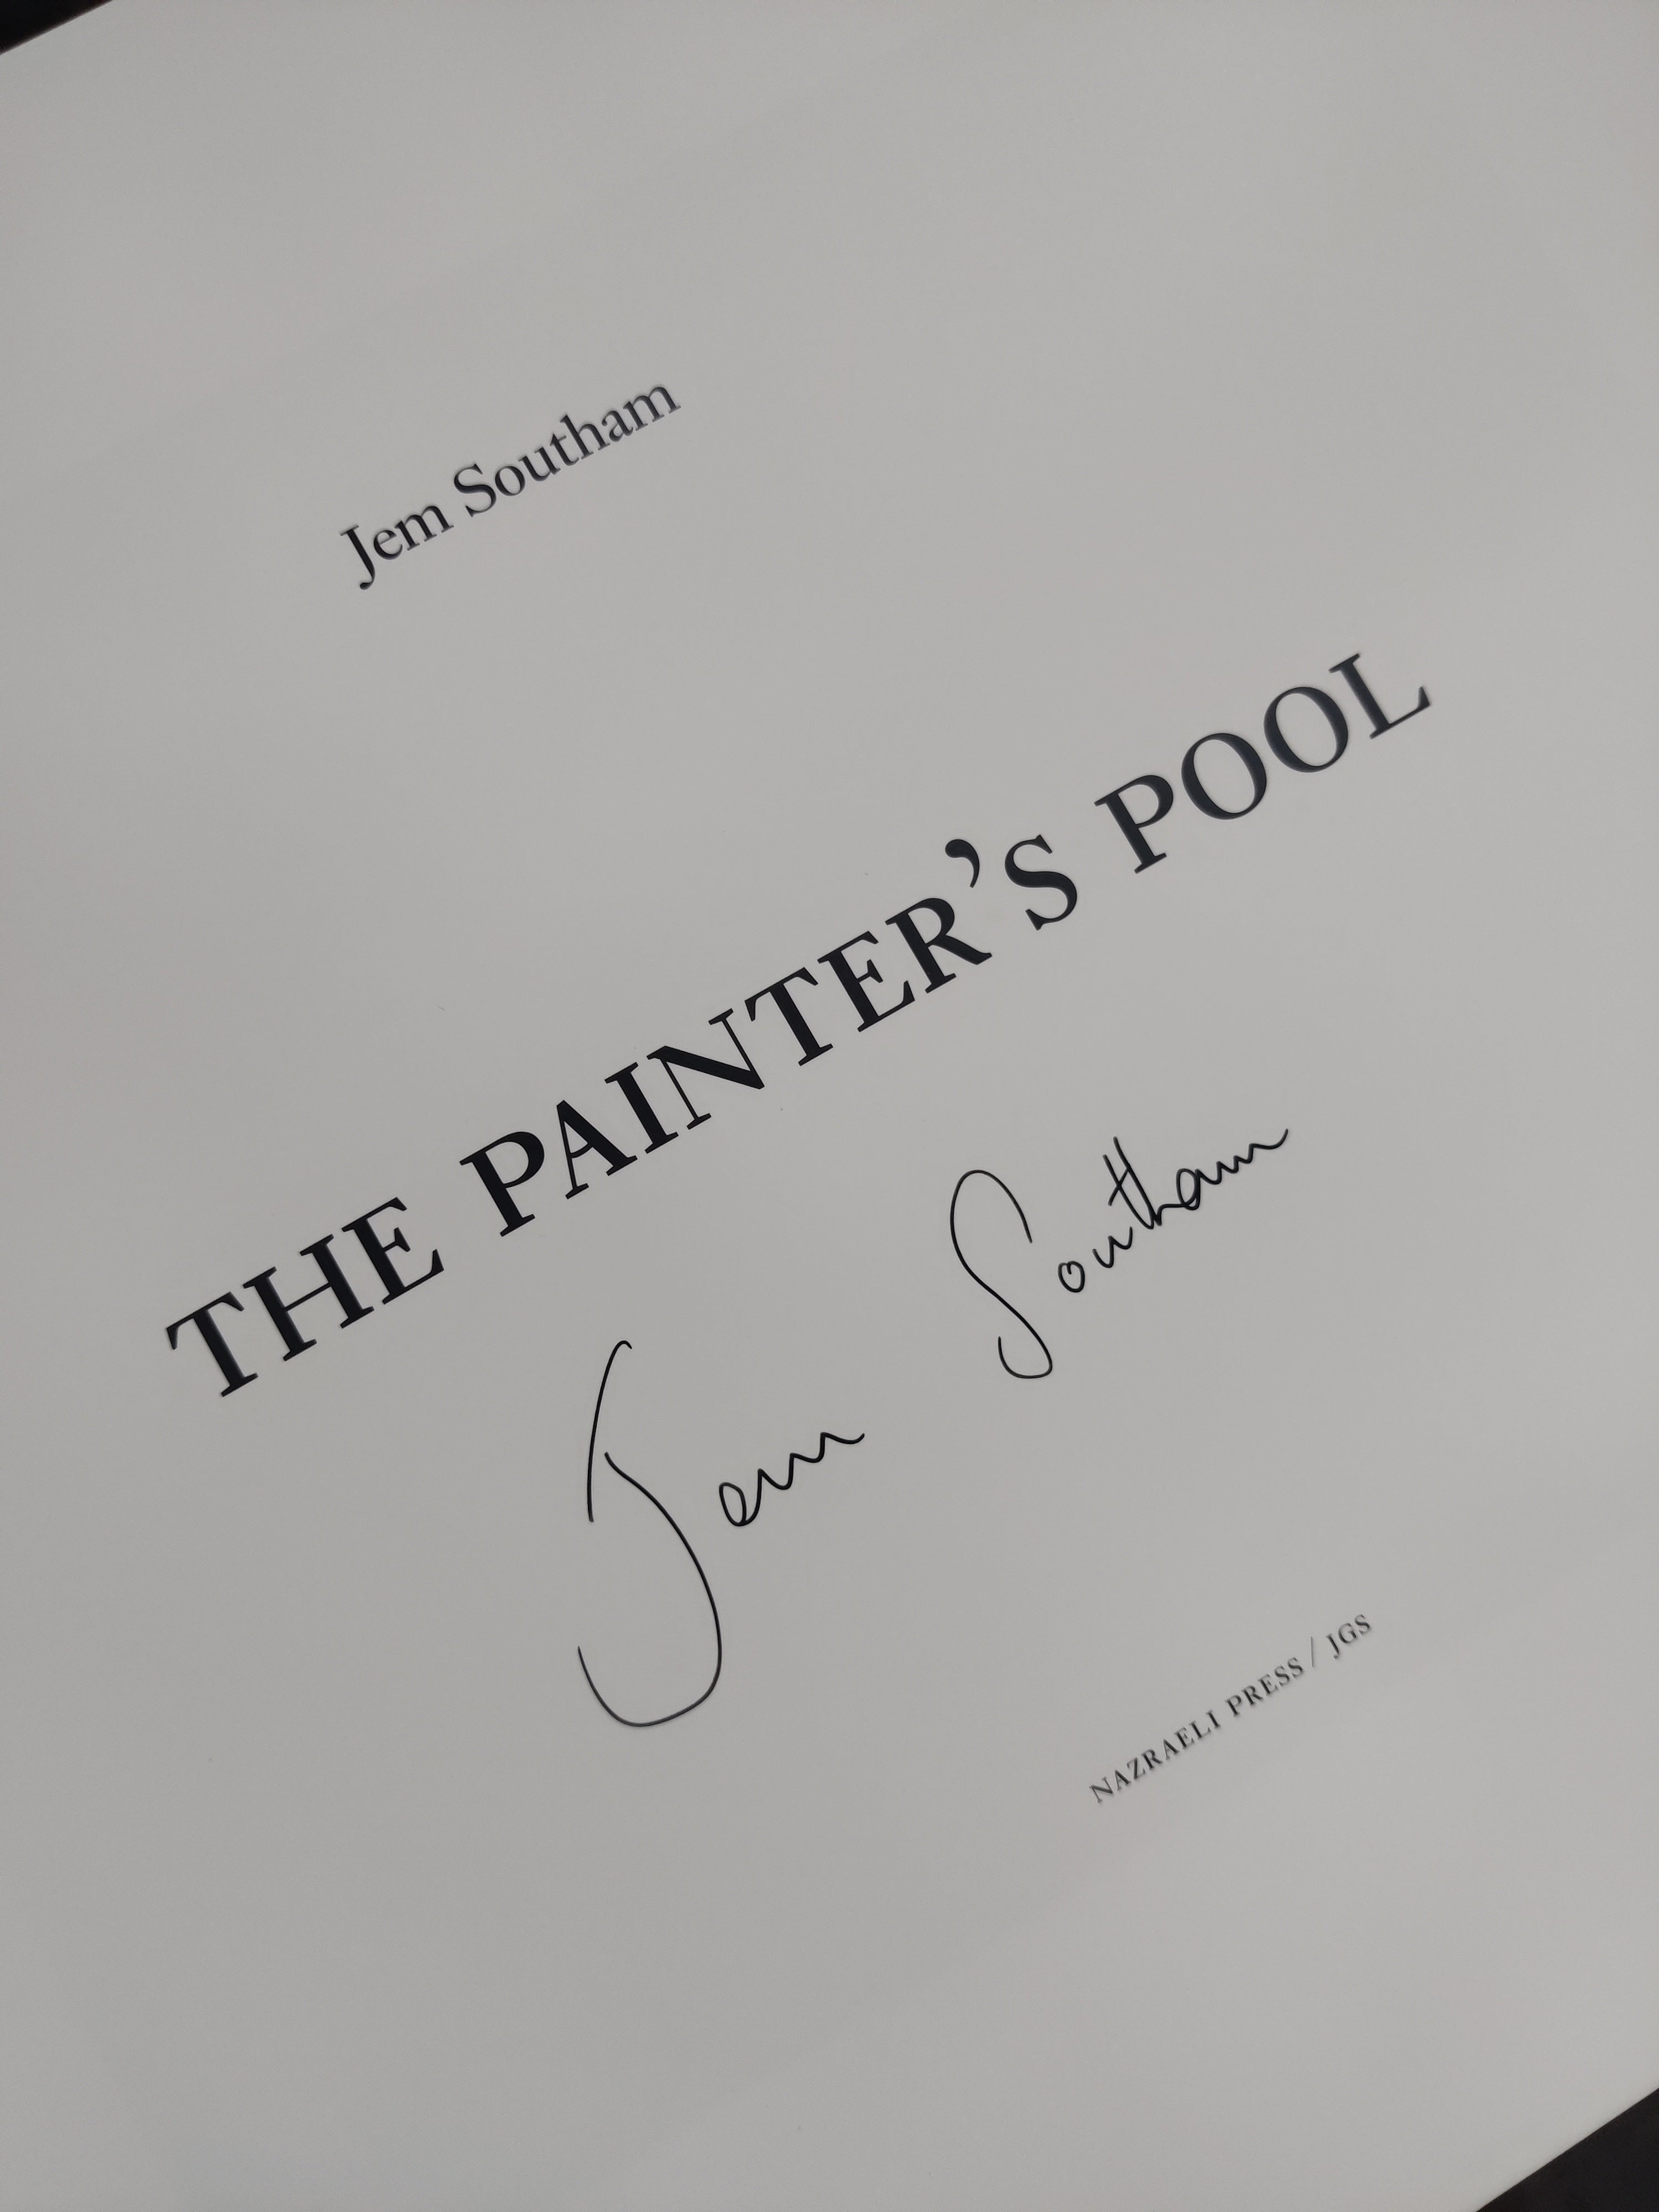 Buy The Painter's Pool by Jem Southam online book store | first 